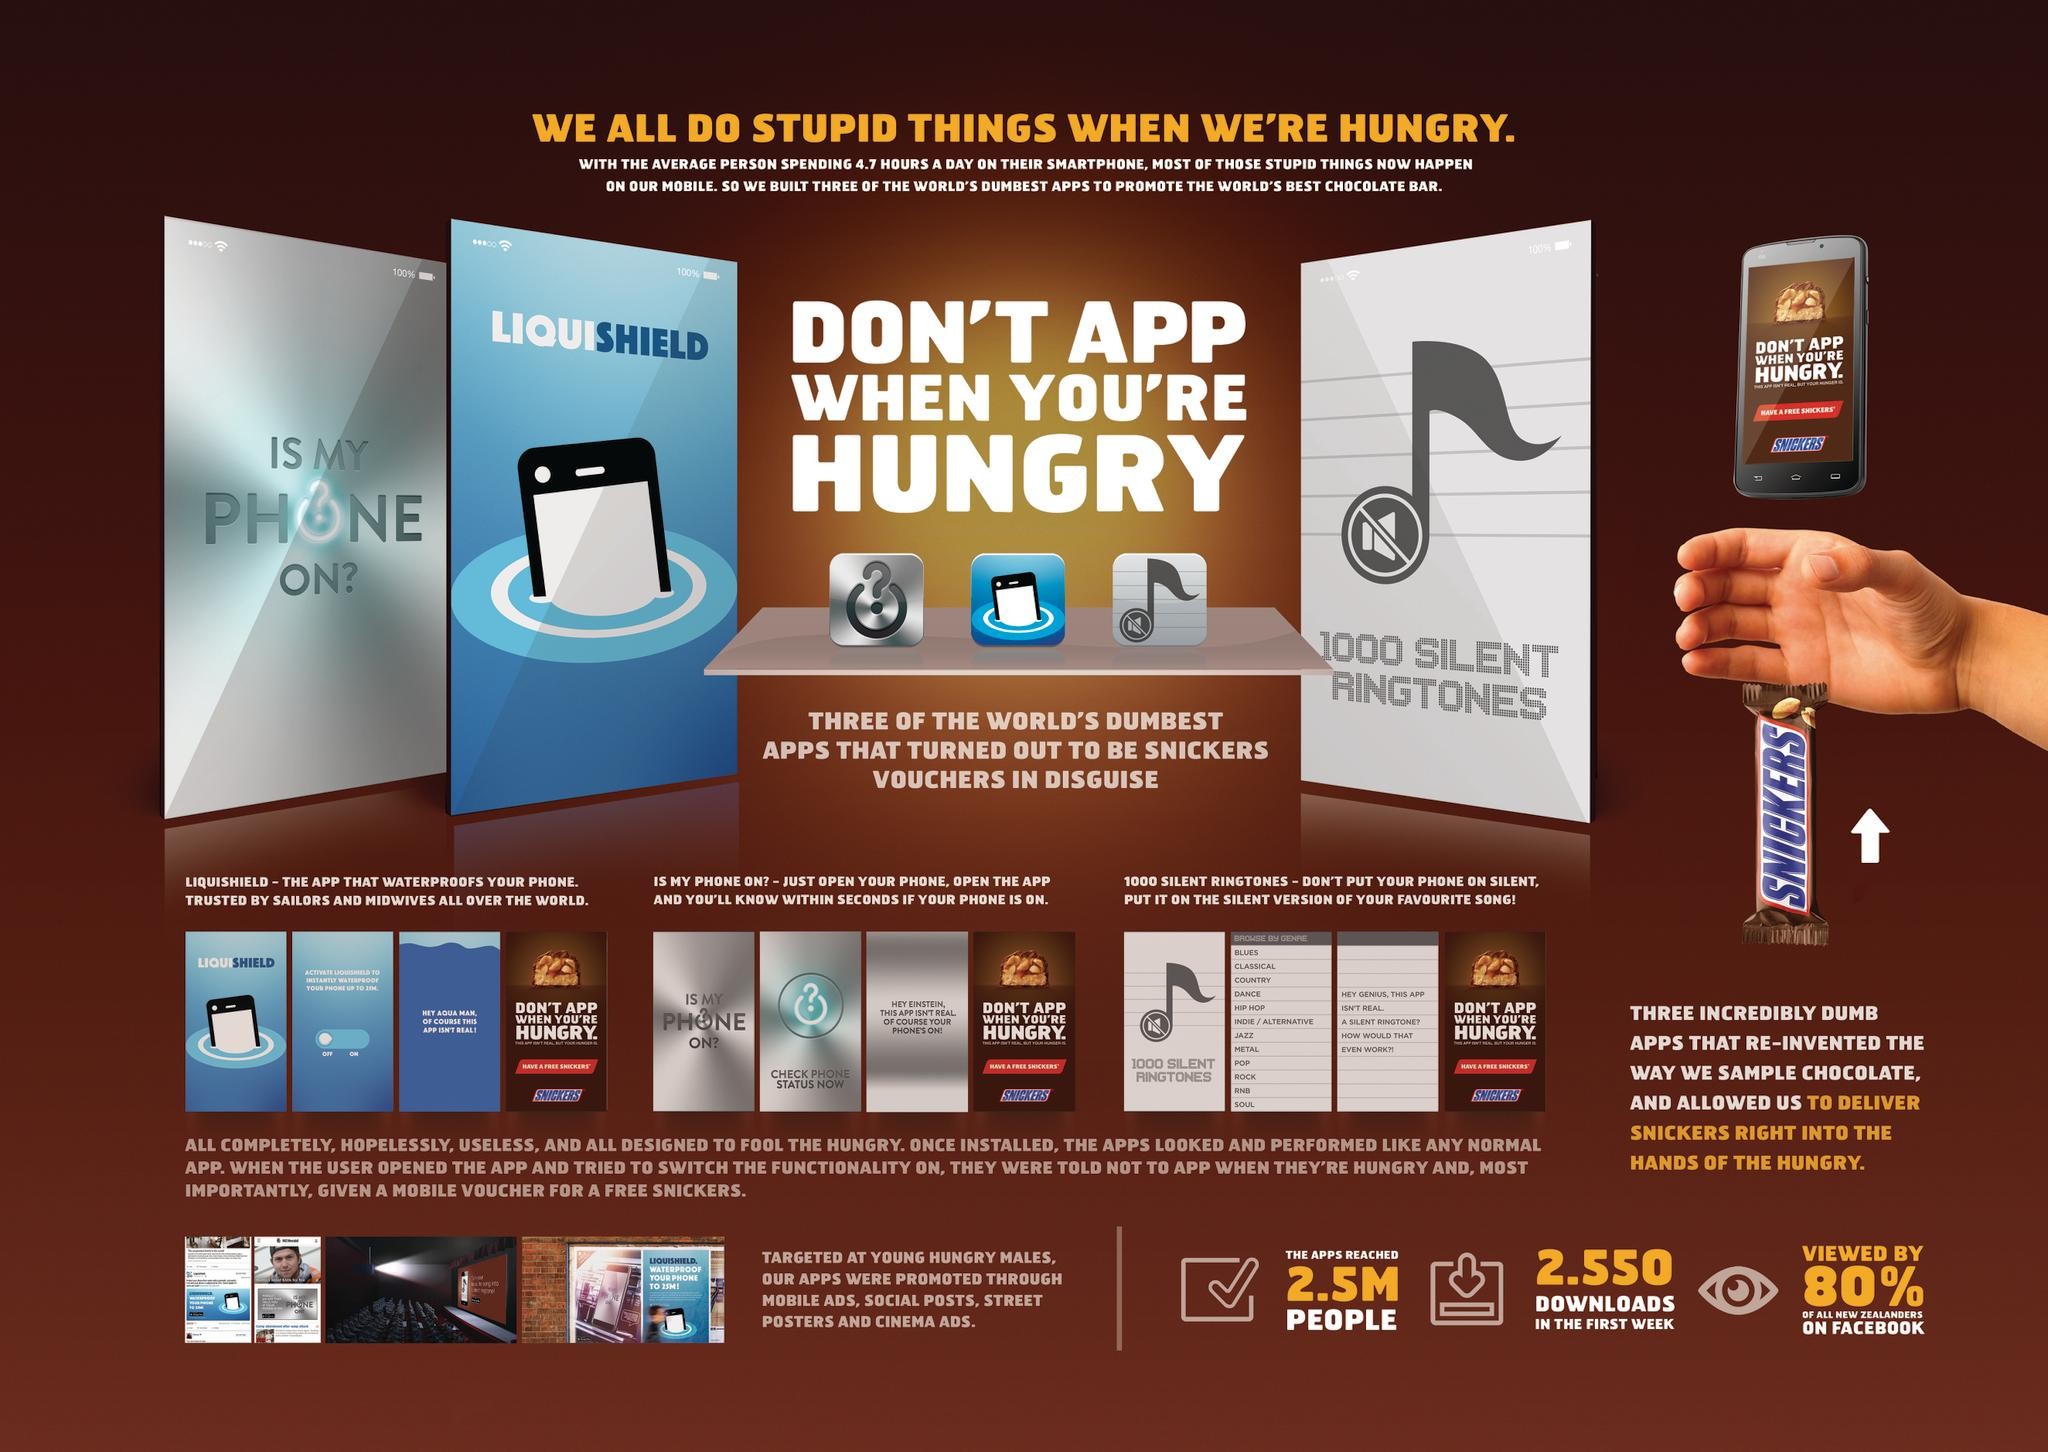 Don't App When You're Hungry